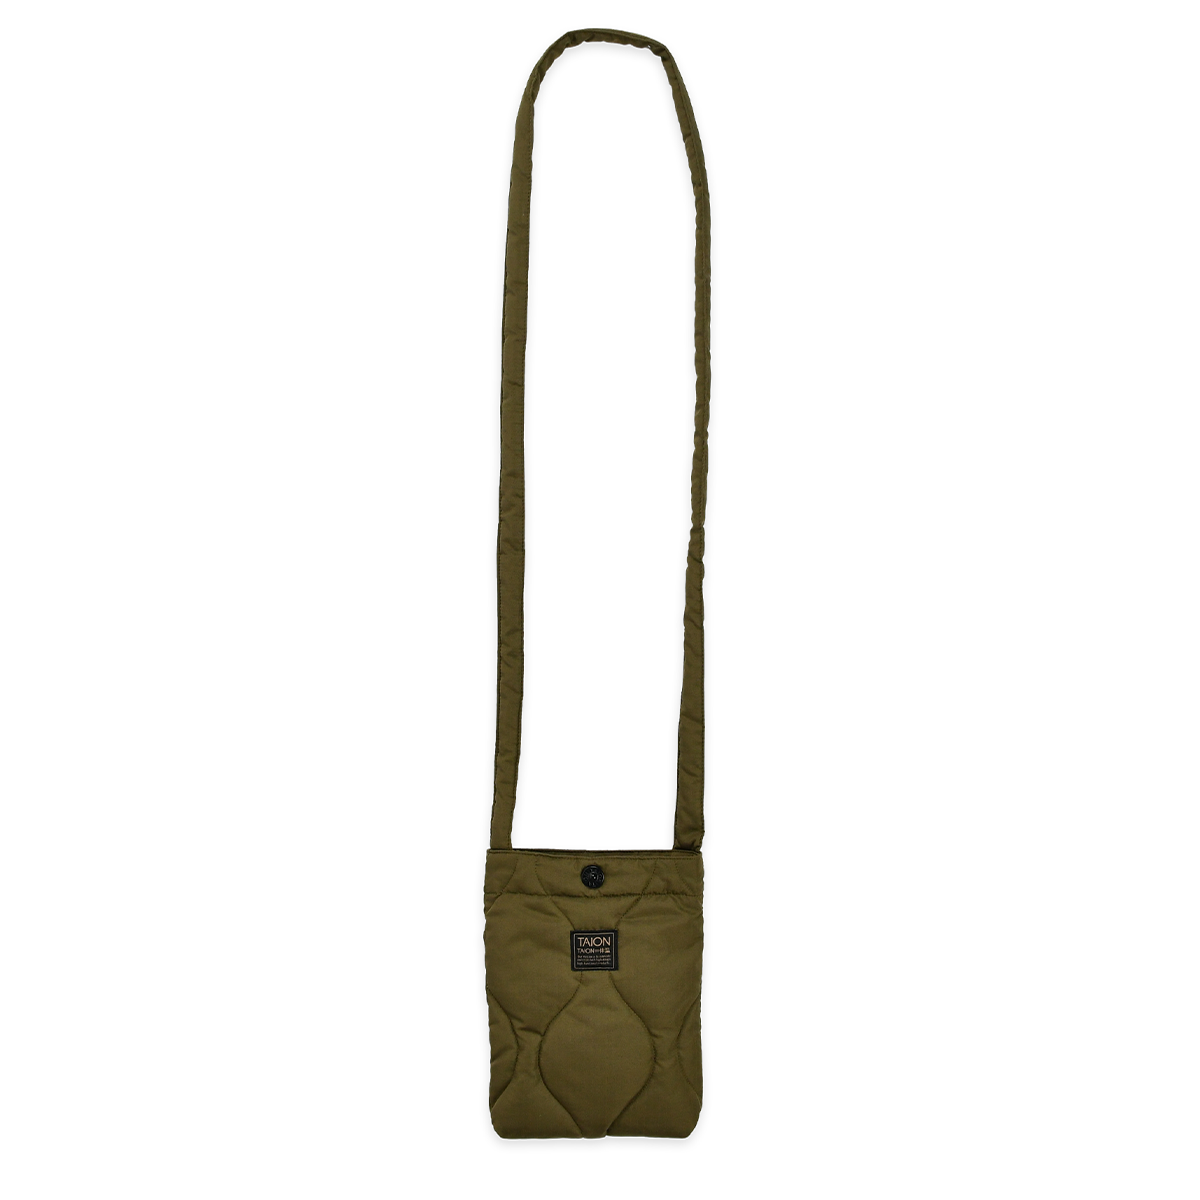 TAION - MILITARY CROSS BODY TOTE - SMALL - D OLIVE